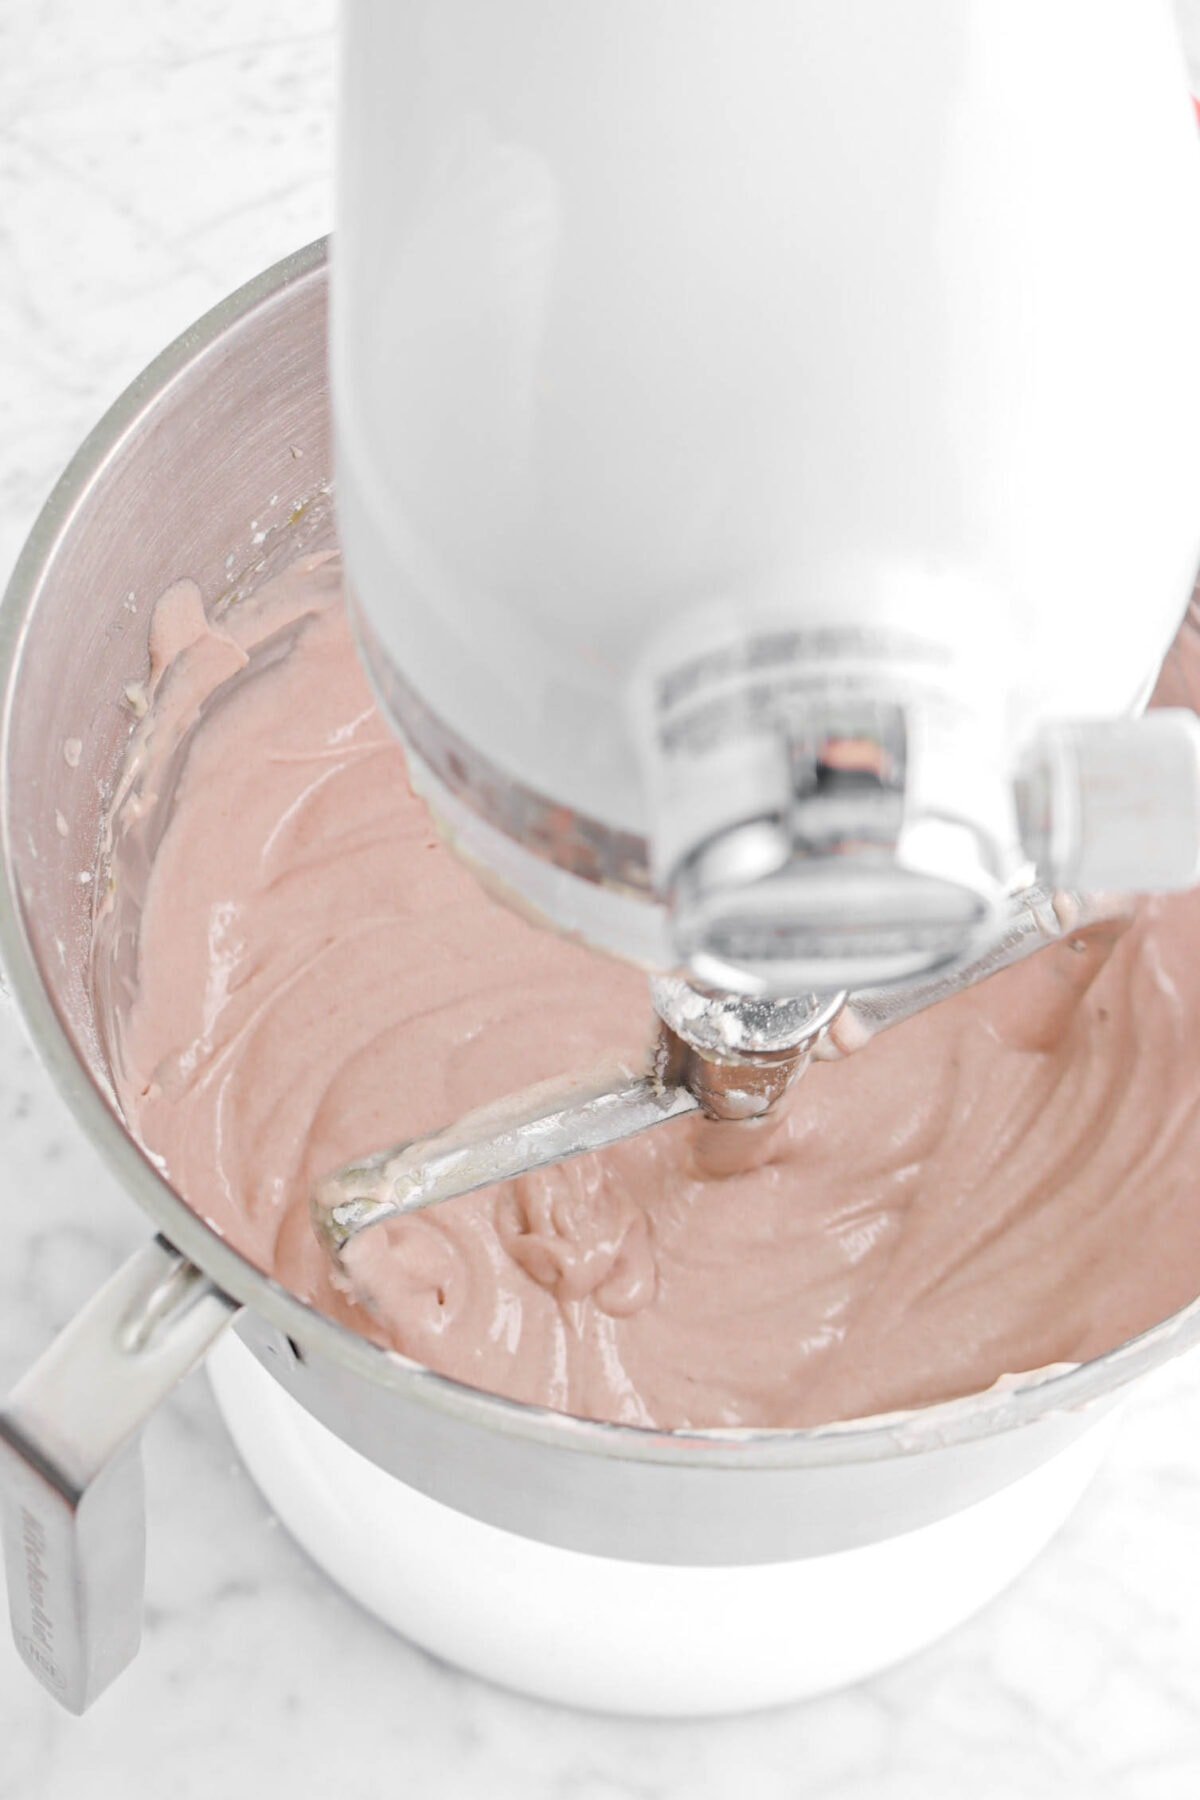 strawberry cake batter in mixer